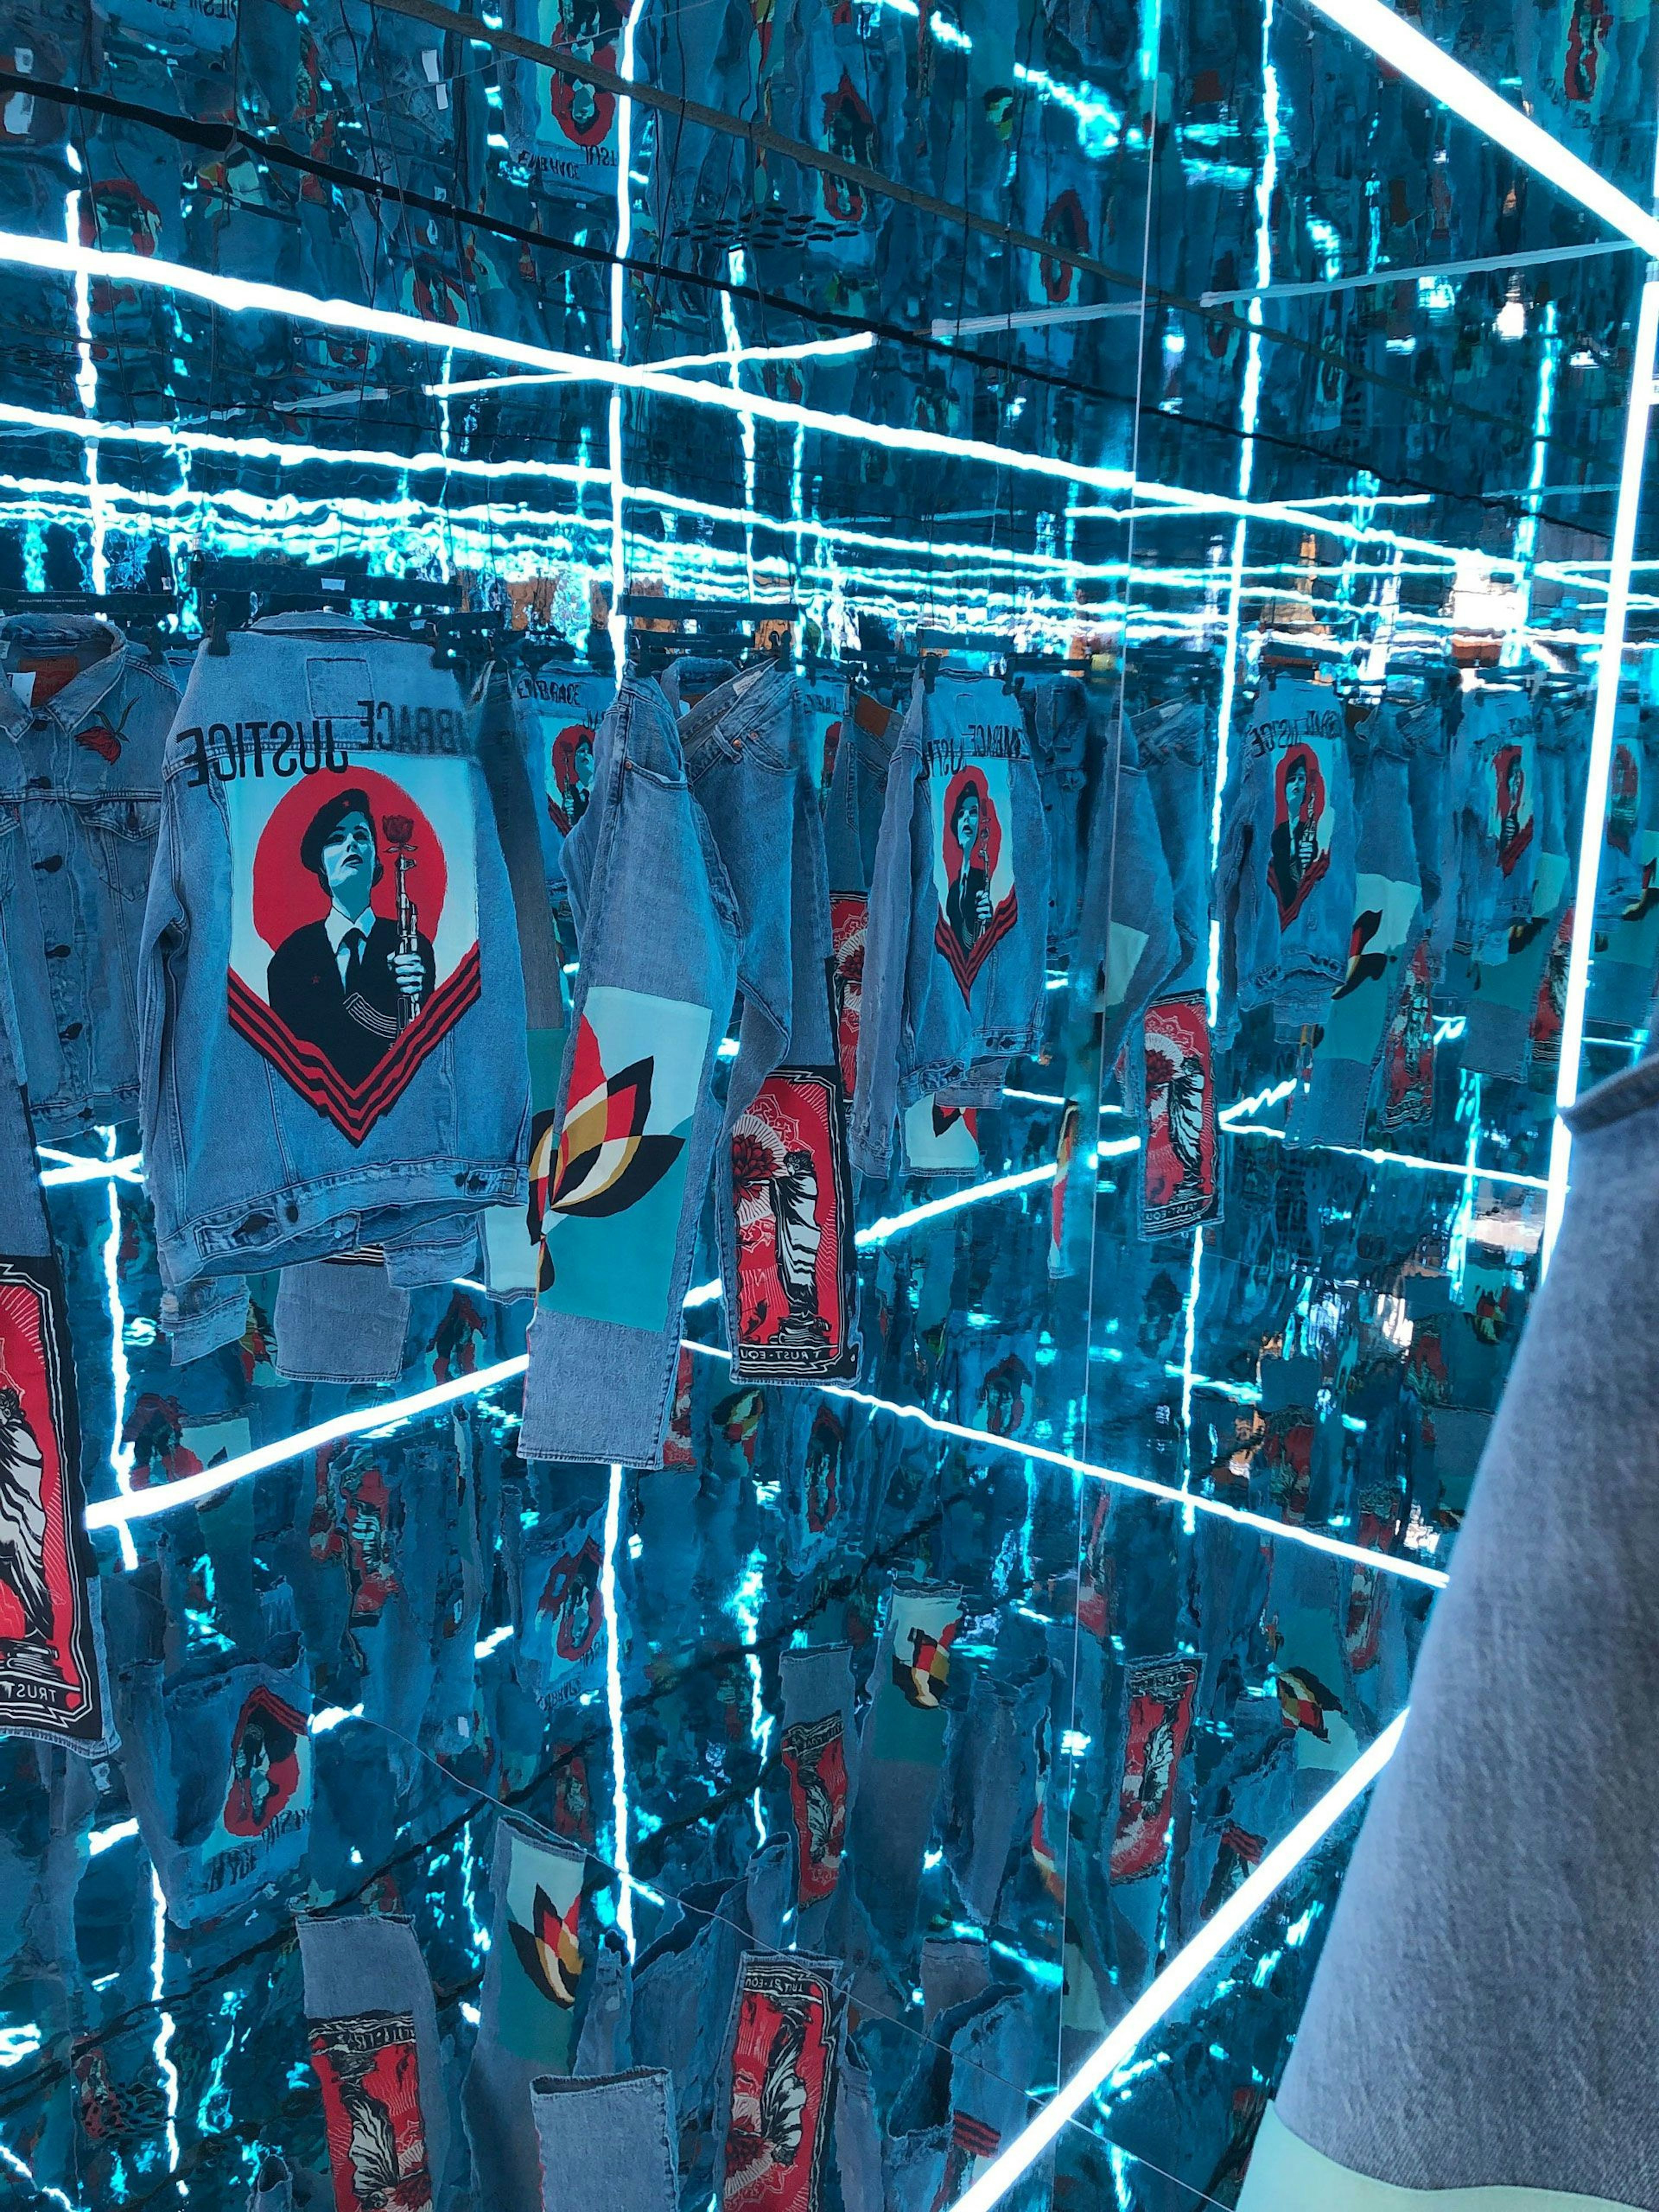 The interior of the shipping container shows an infinity room that is edge-lit with RGB LED strips. Shepherd Fairey customised clothing hangs in the space.